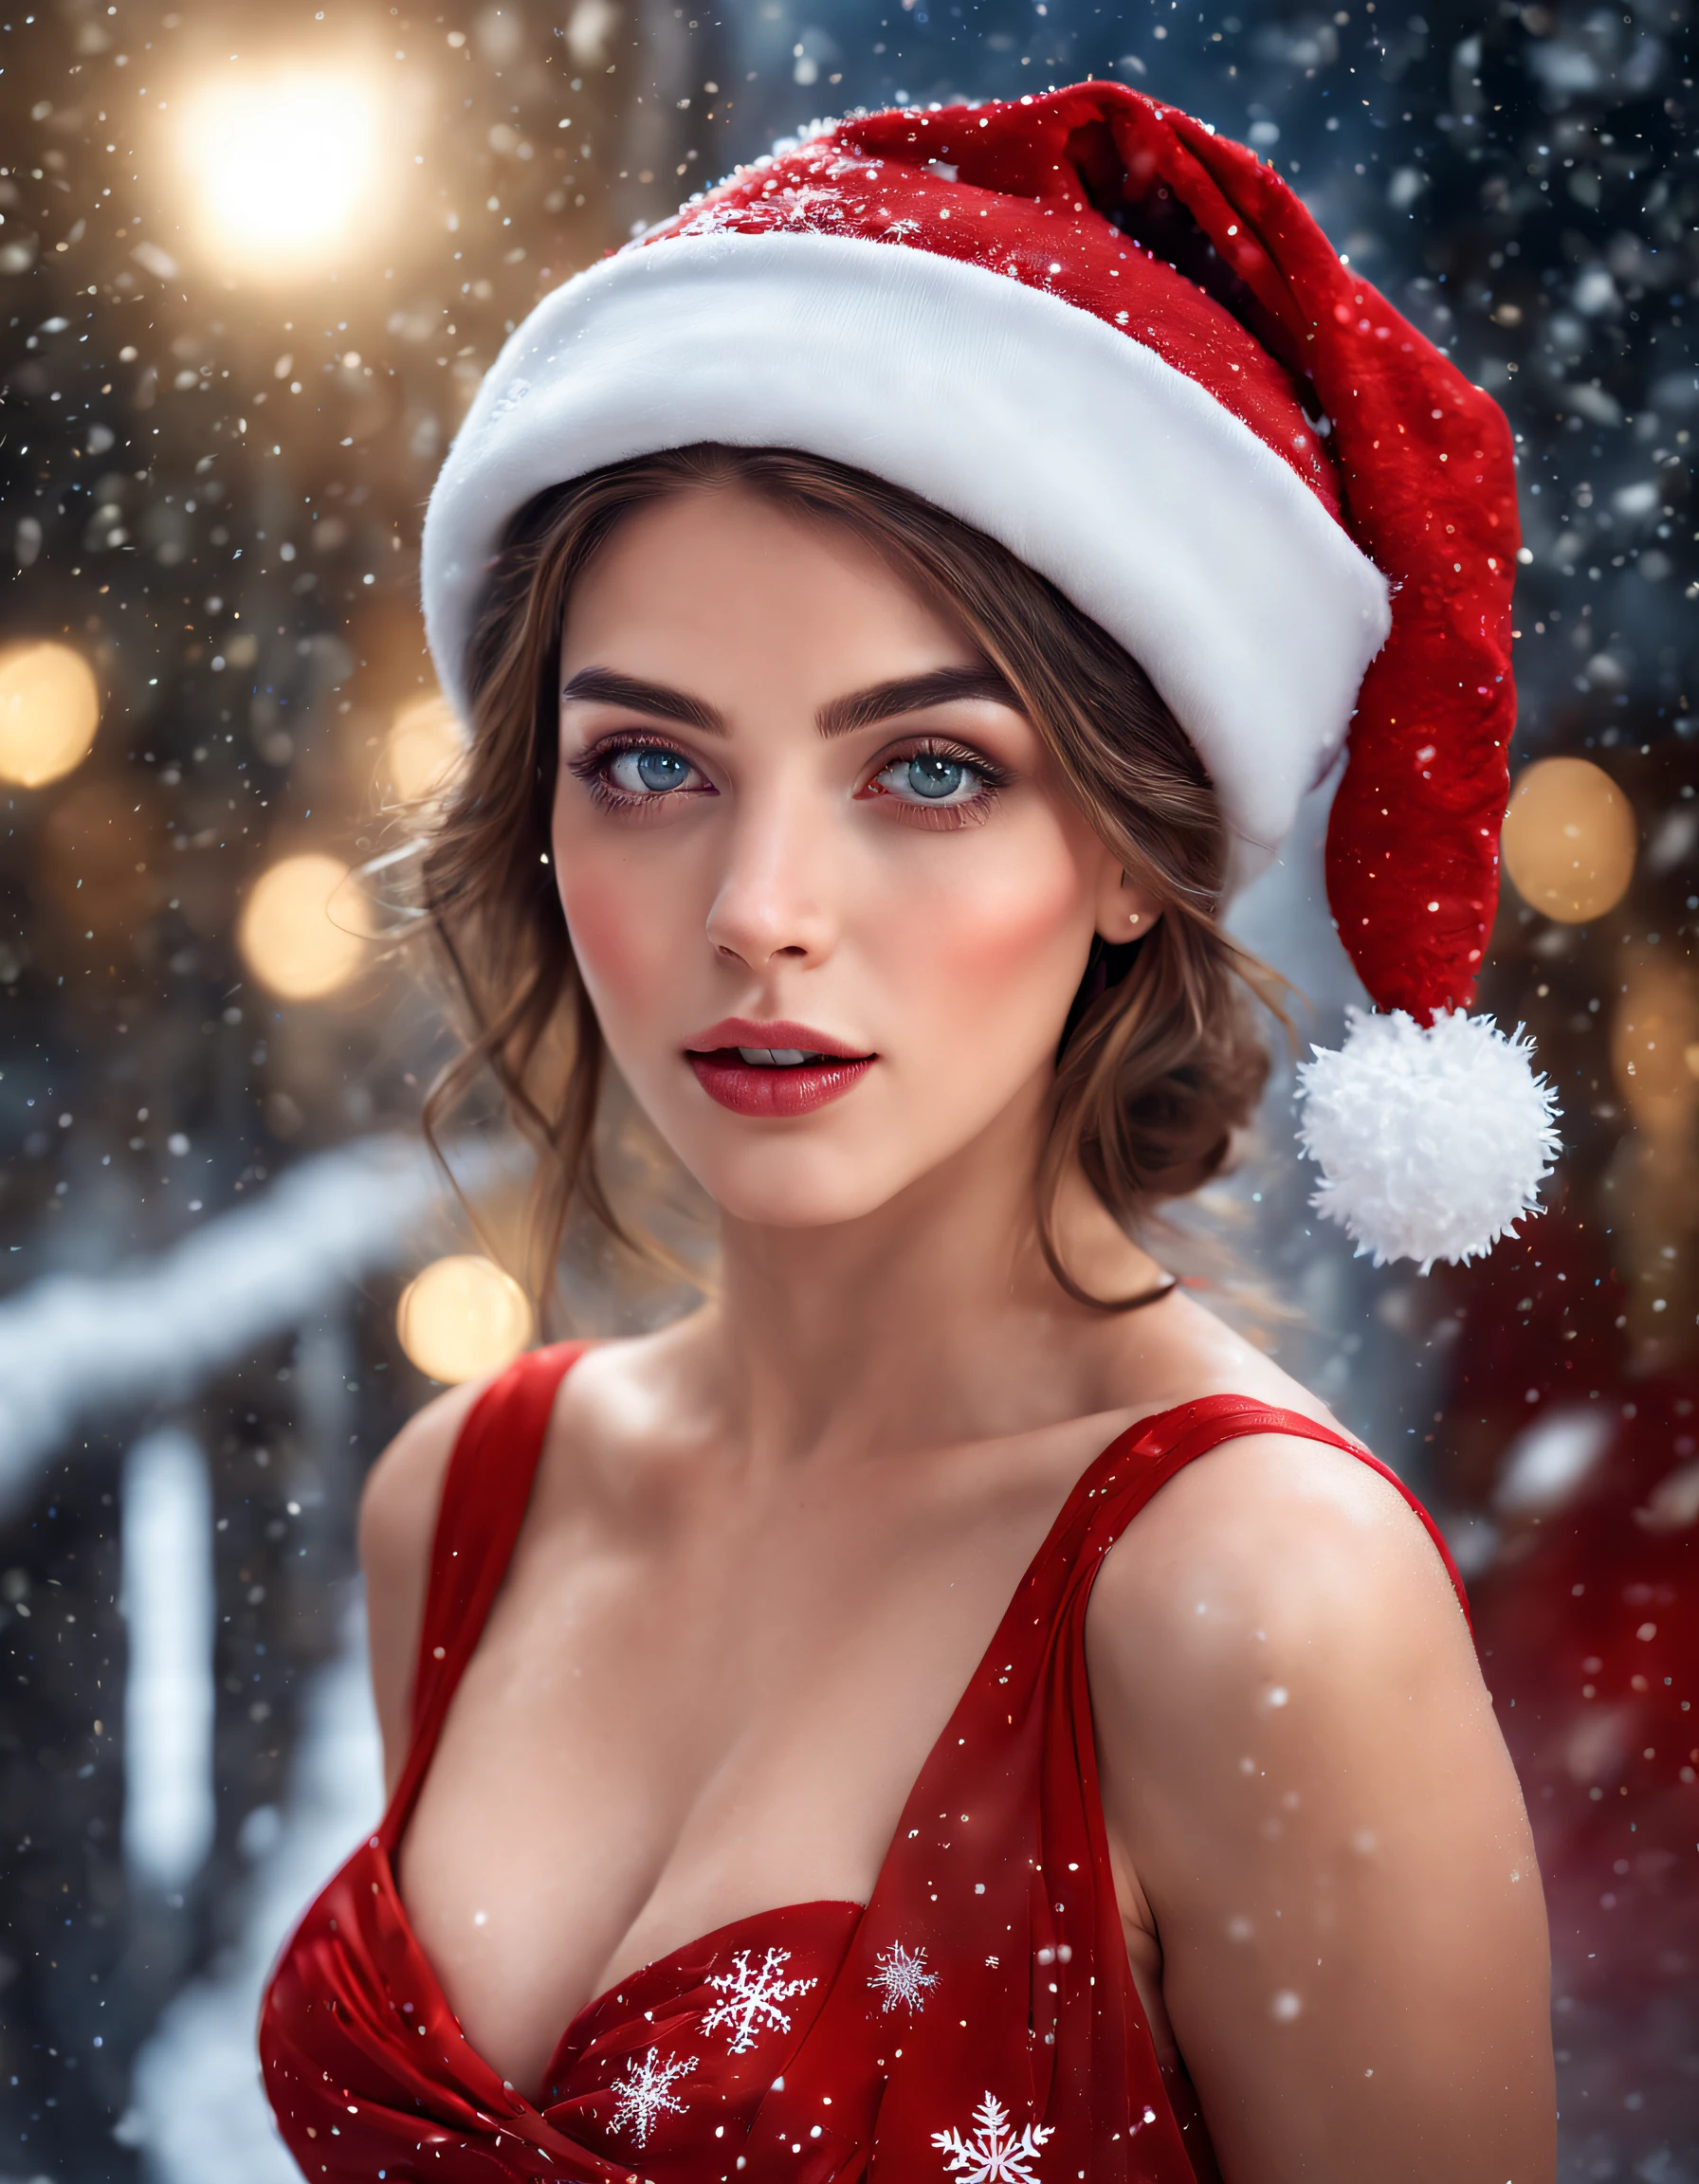 (best quality,highres:1.2),Realistic,portraite,Beautiful woman,perfectly detailed face,detailed eyes and lips,red silk dress,Christmas has,snow falling from the sky,vivid colors,Winter scenario,Snowflakes in the background,festive atmosphere,Soft lighting and Warm